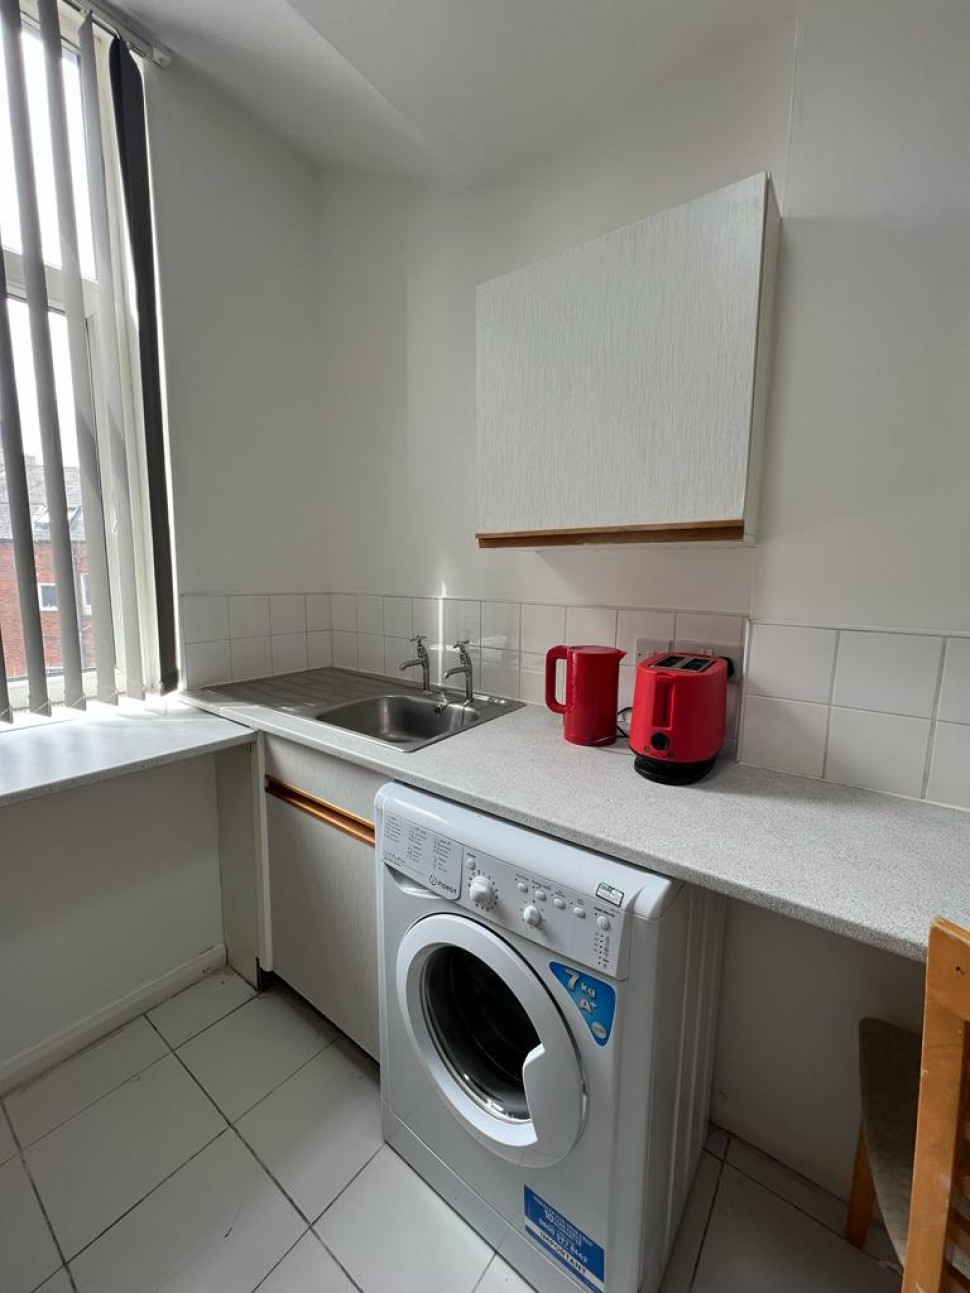 Images for BED (City Centre), Northampton Street, Leicester EAID: BID:Leicester